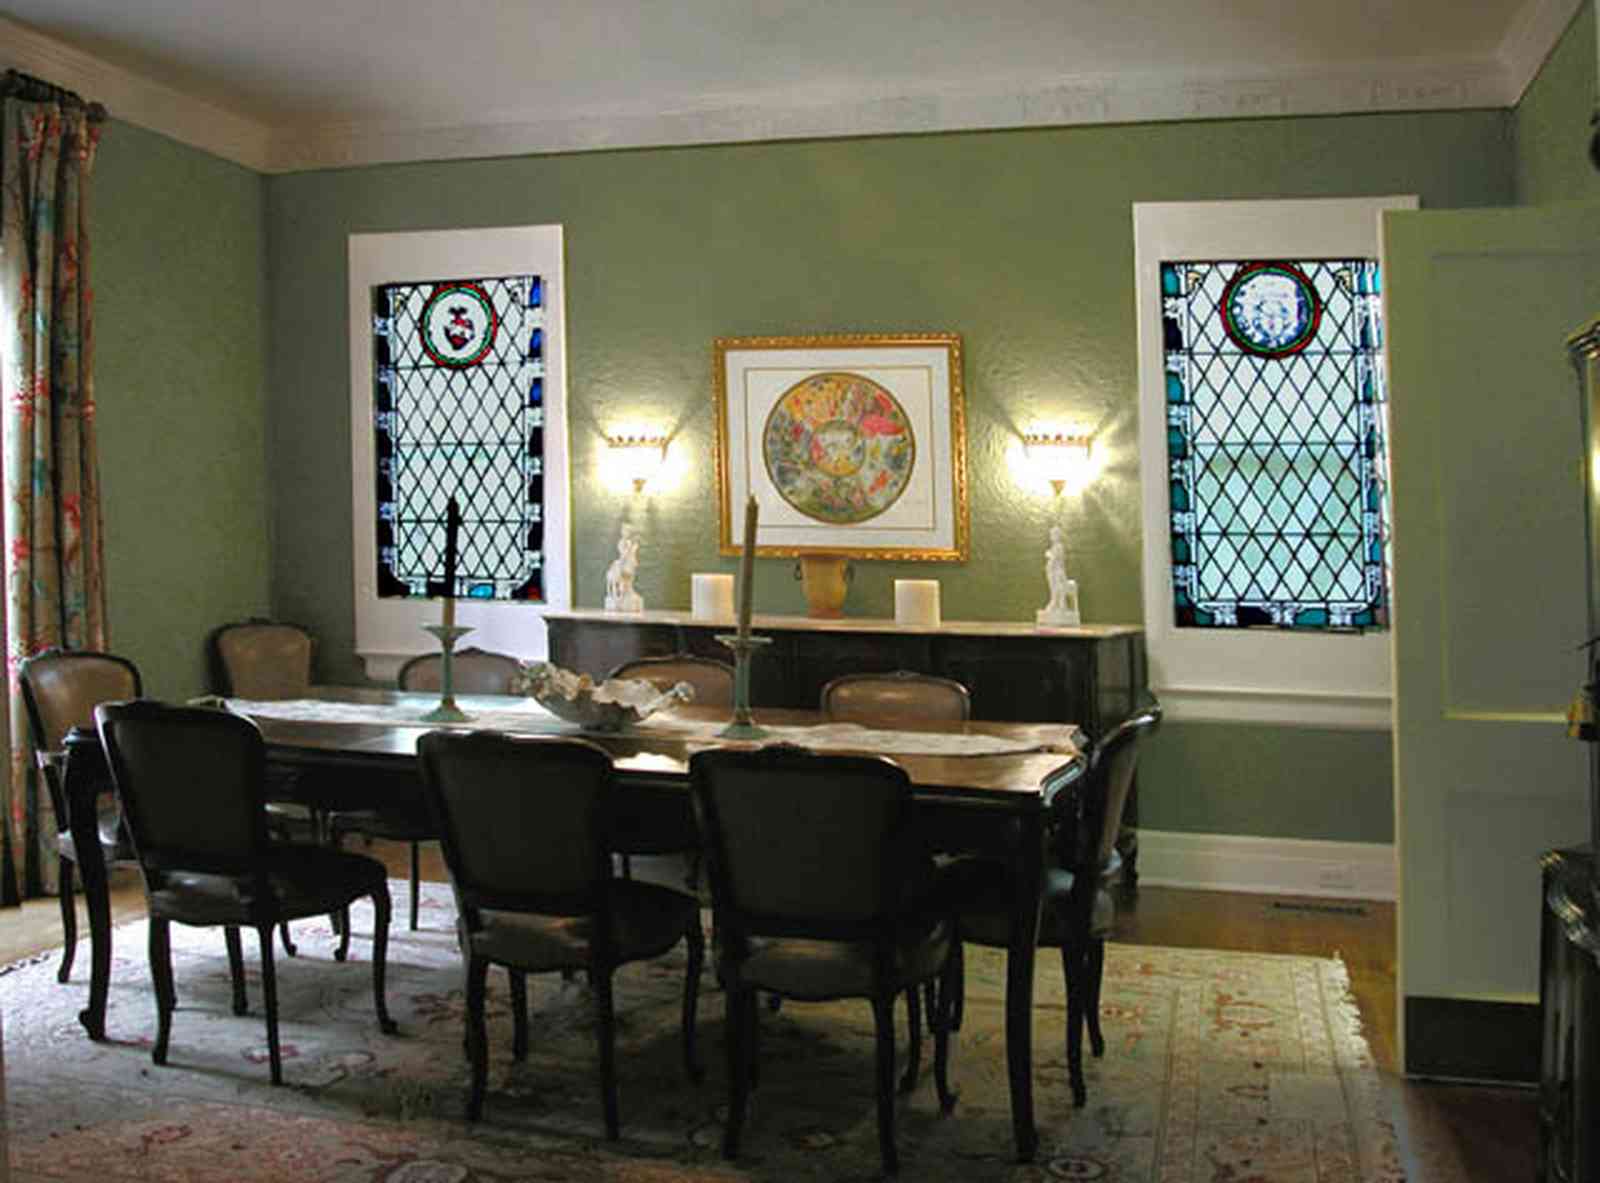 North-Hill:-123-West-Lloyd-Street_15.jpg:  dining room, stained glass windows, oriental rug, swinging door, drapes, front room, italienate architecture